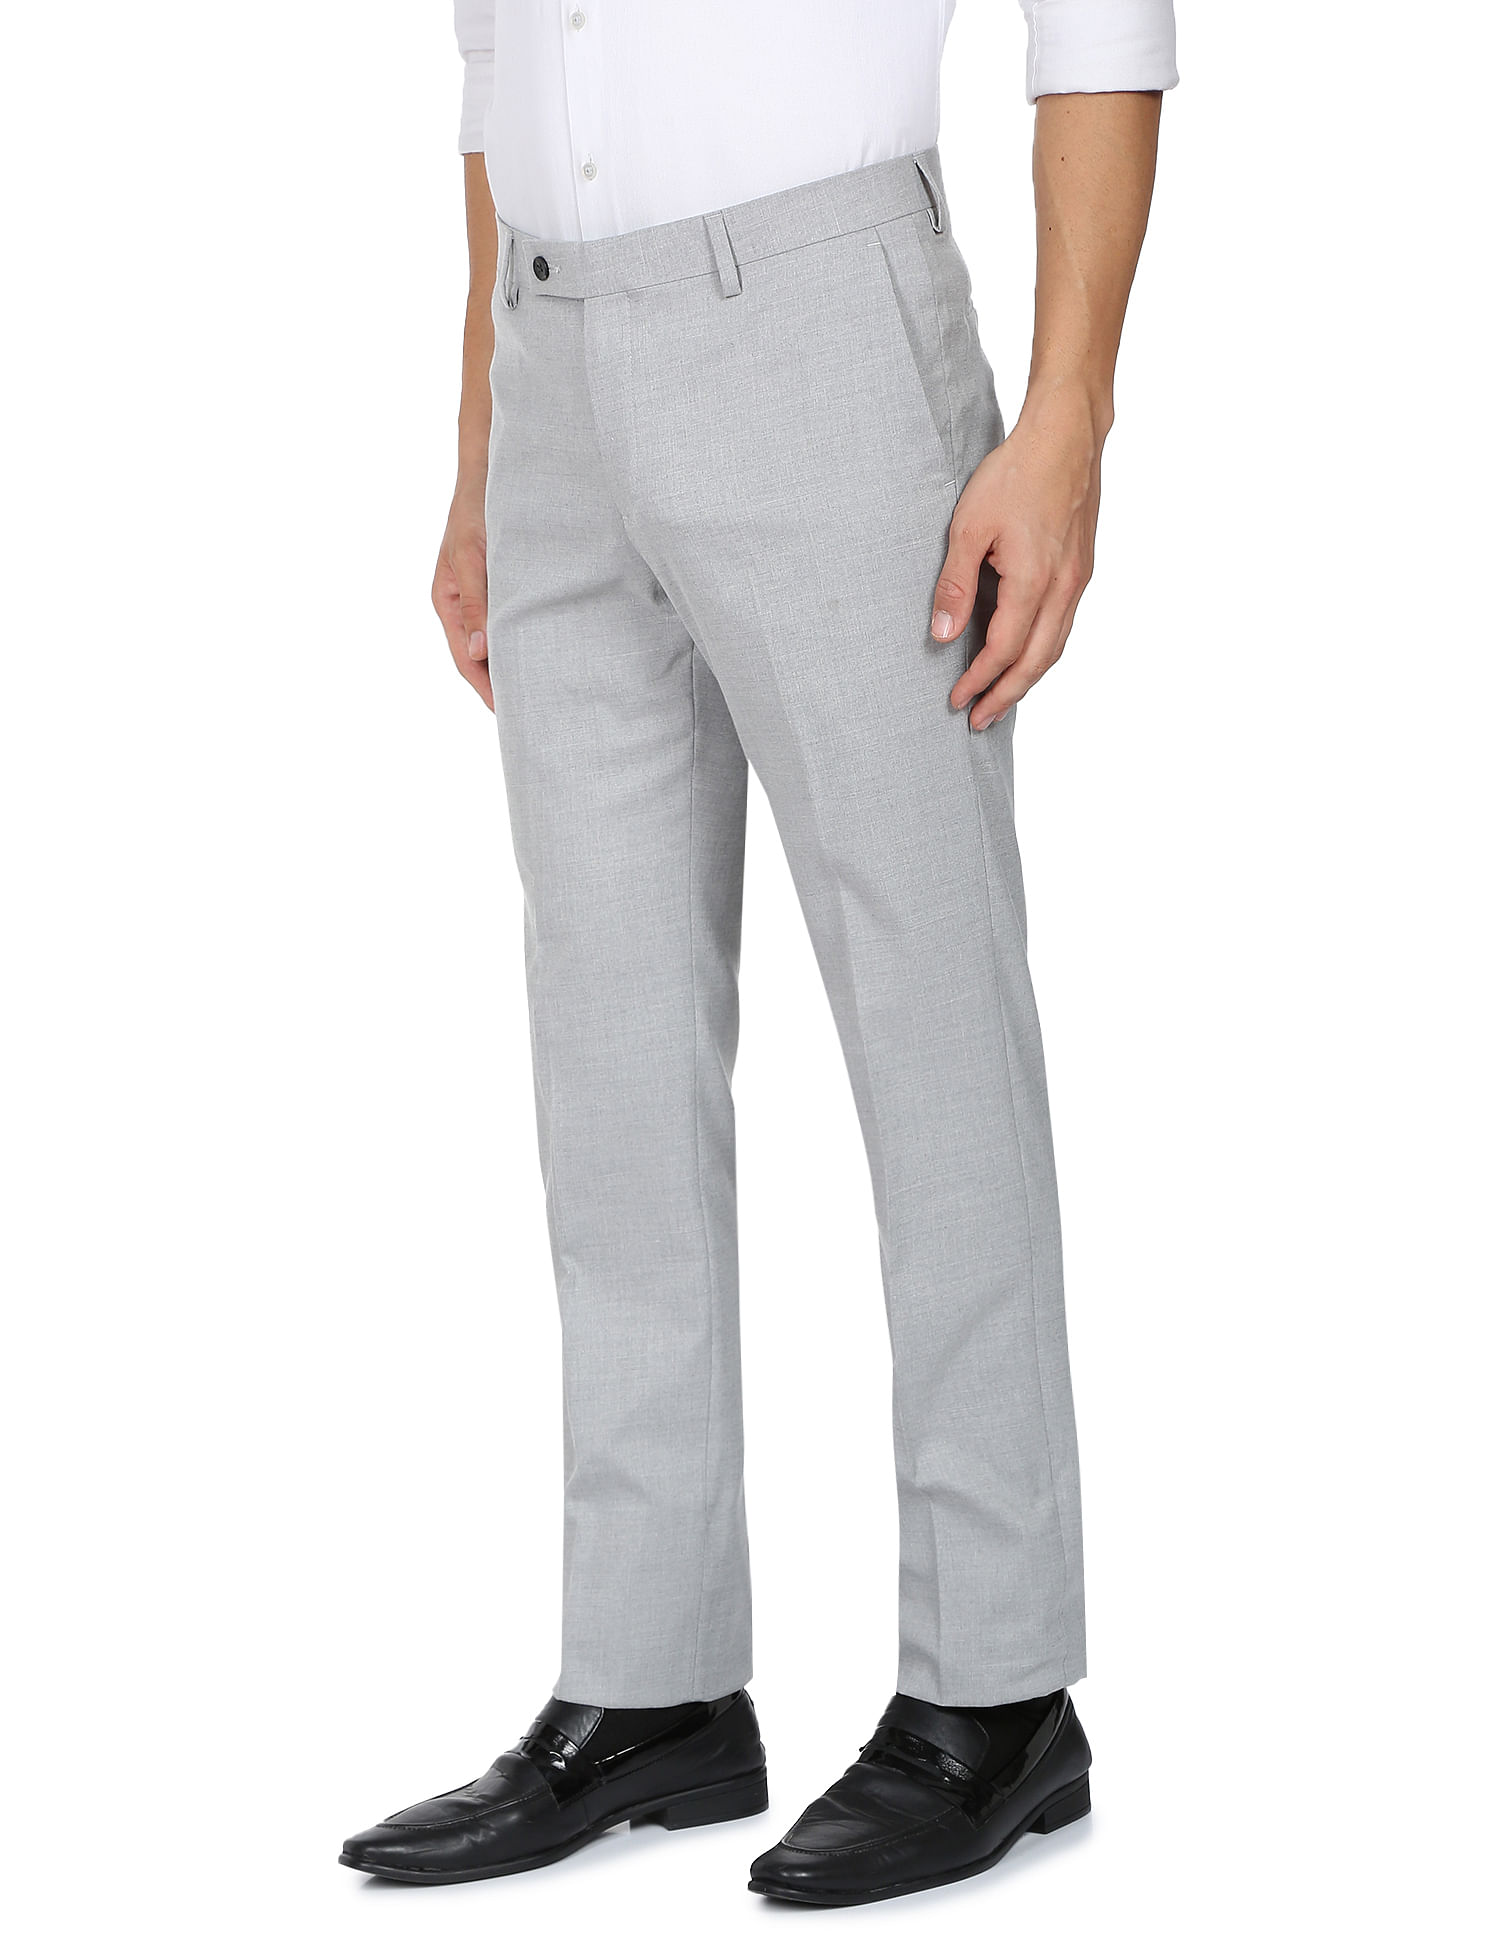 Canali | Light Grey Tropical Wool Flat Front Trousers – Baltzar